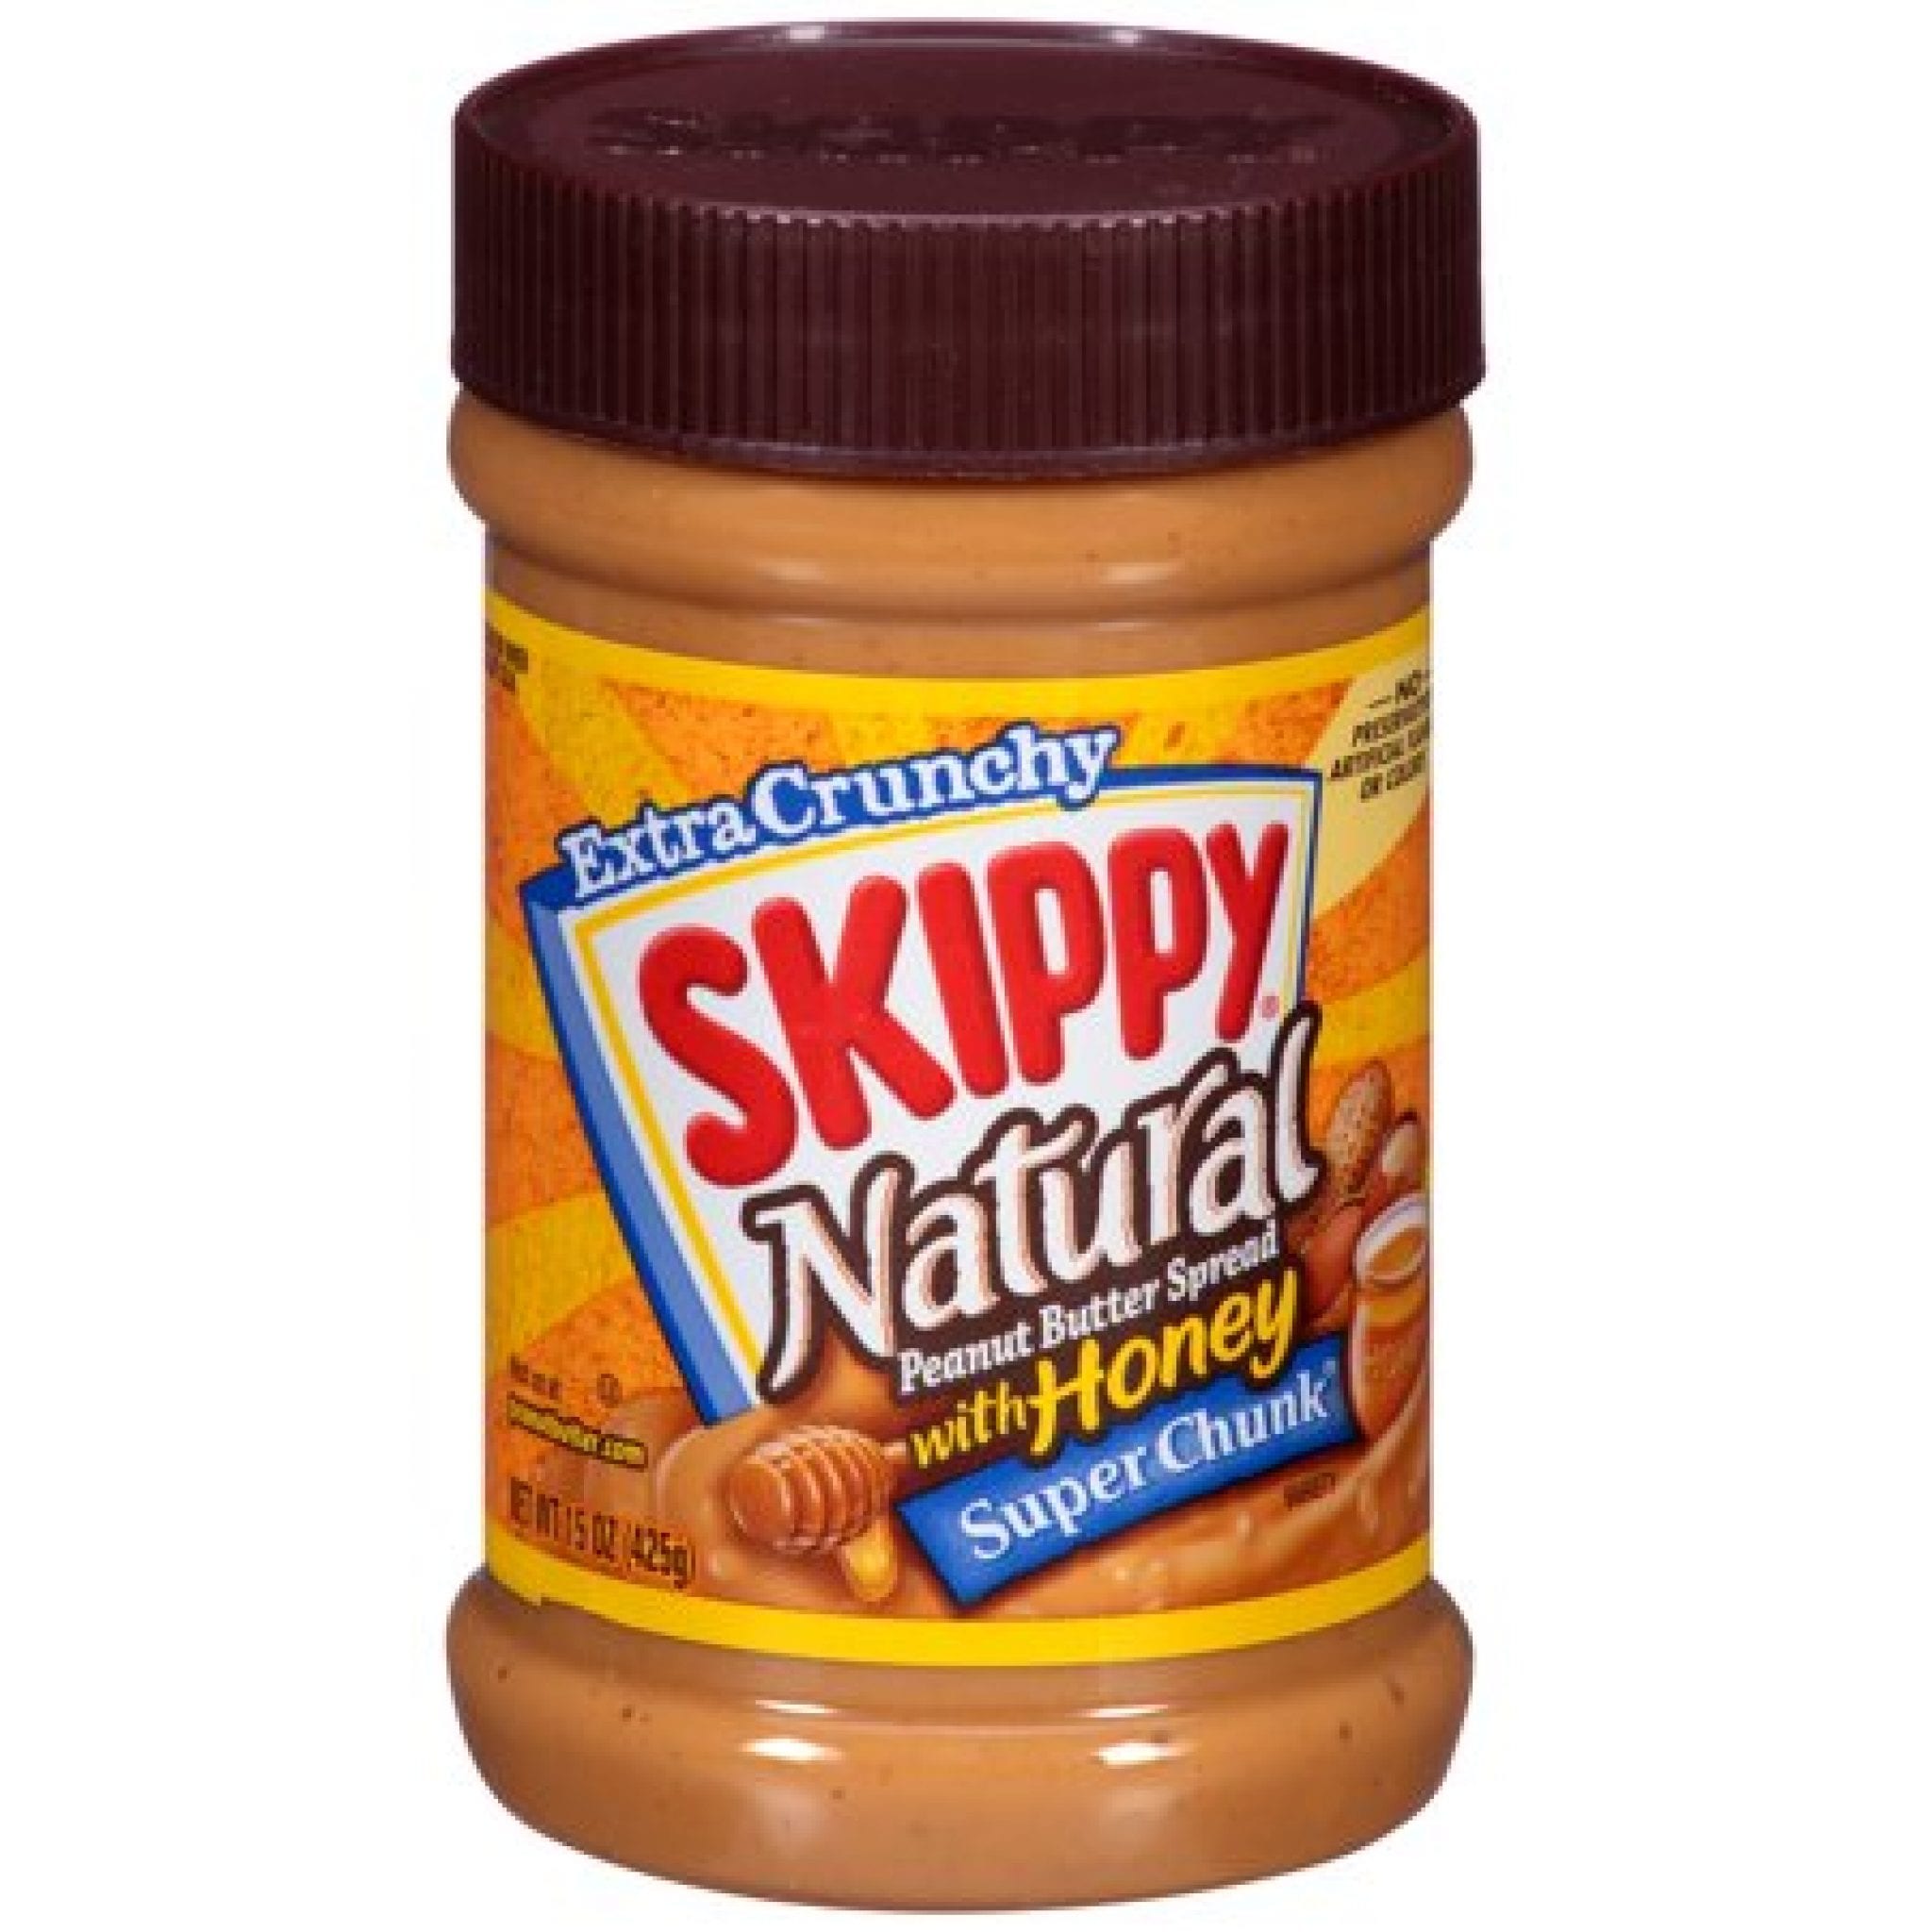 skippy-natural-super-chunk-peanut-butter-15-ounce-only-48-cents